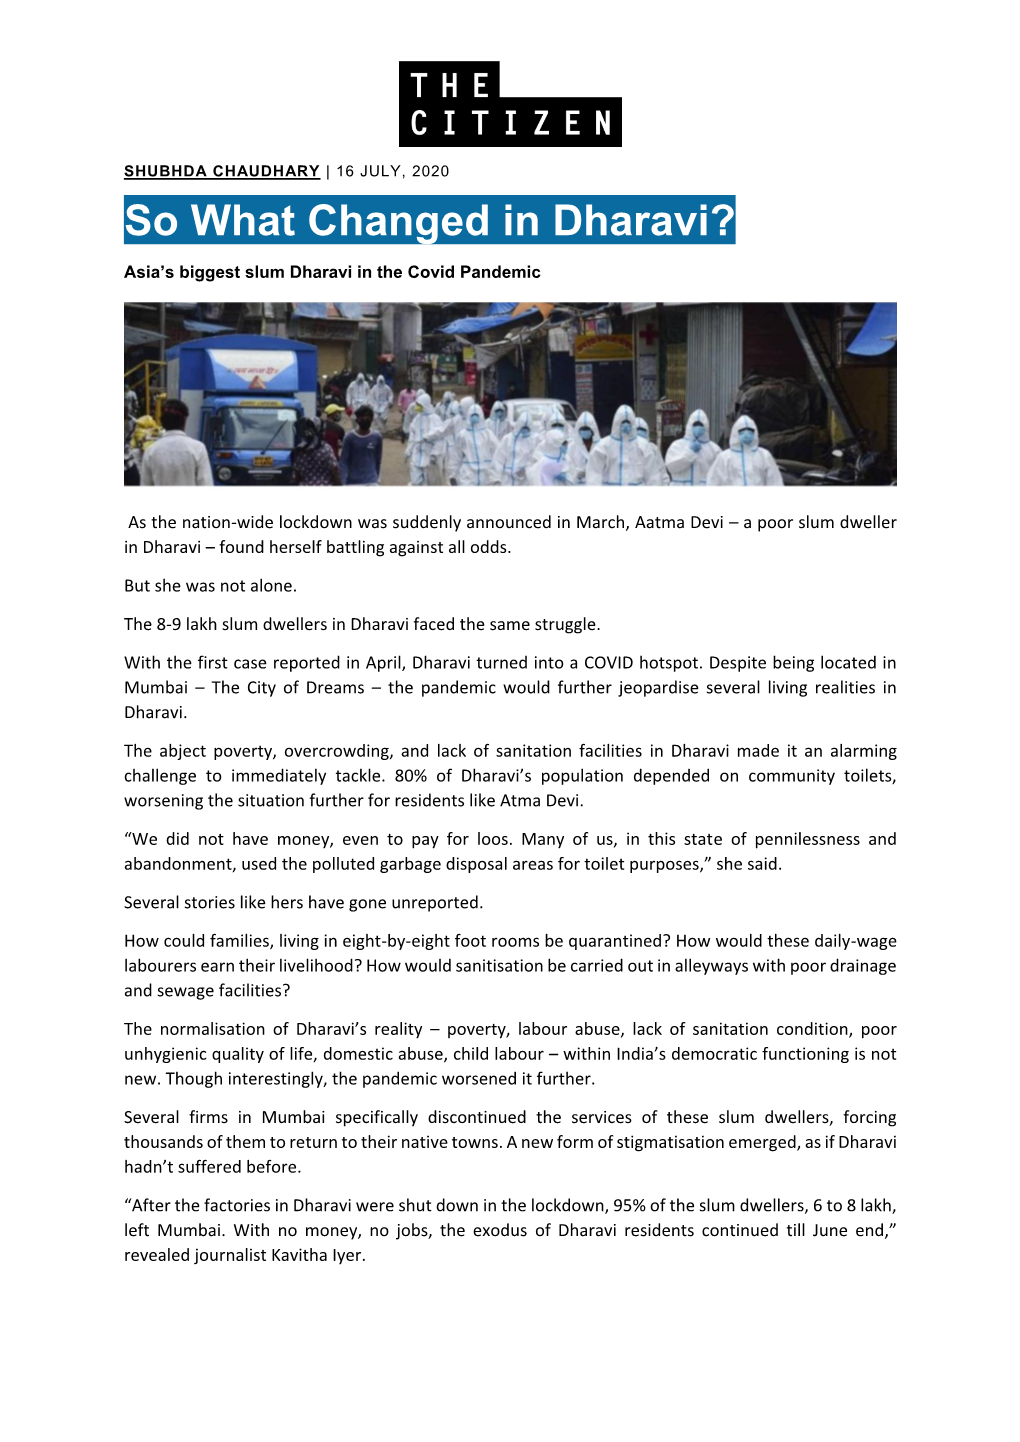 So What Changed in Dharavi?